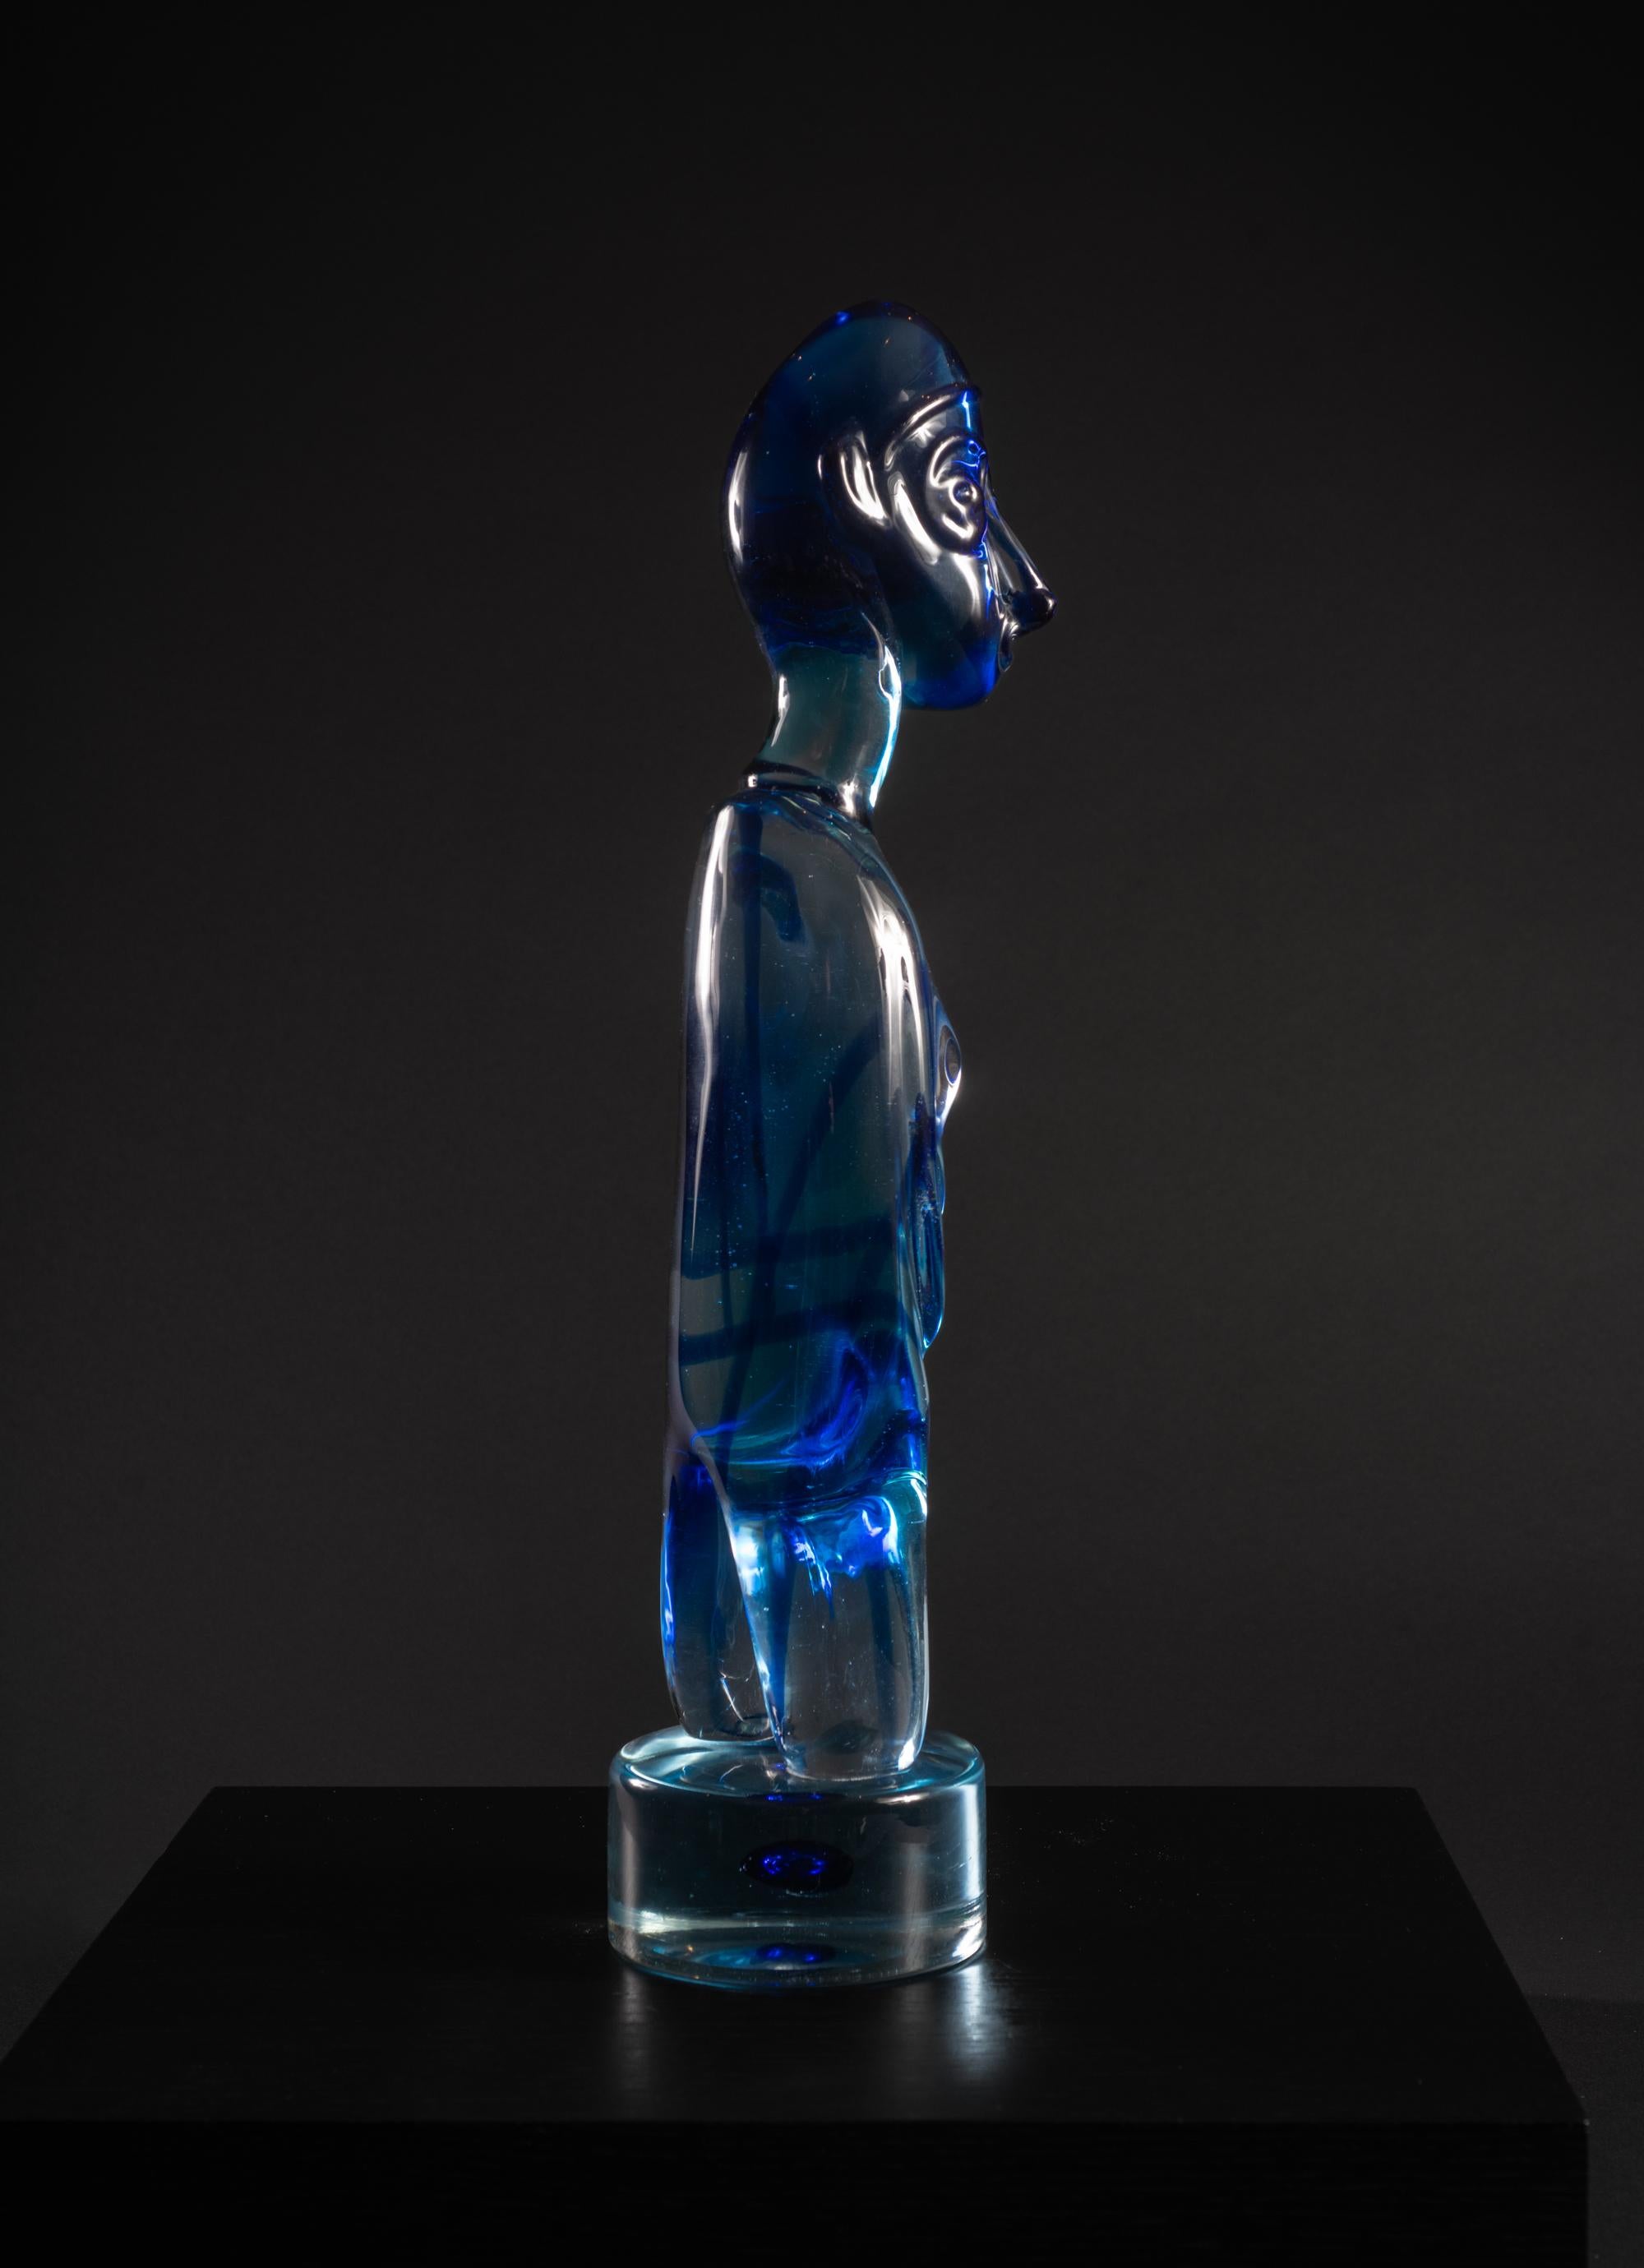 Mid-20th Century Modern Art Figure Sculpture by Ermanno Nason for Cenedese. Homage to Kokoschka For Sale